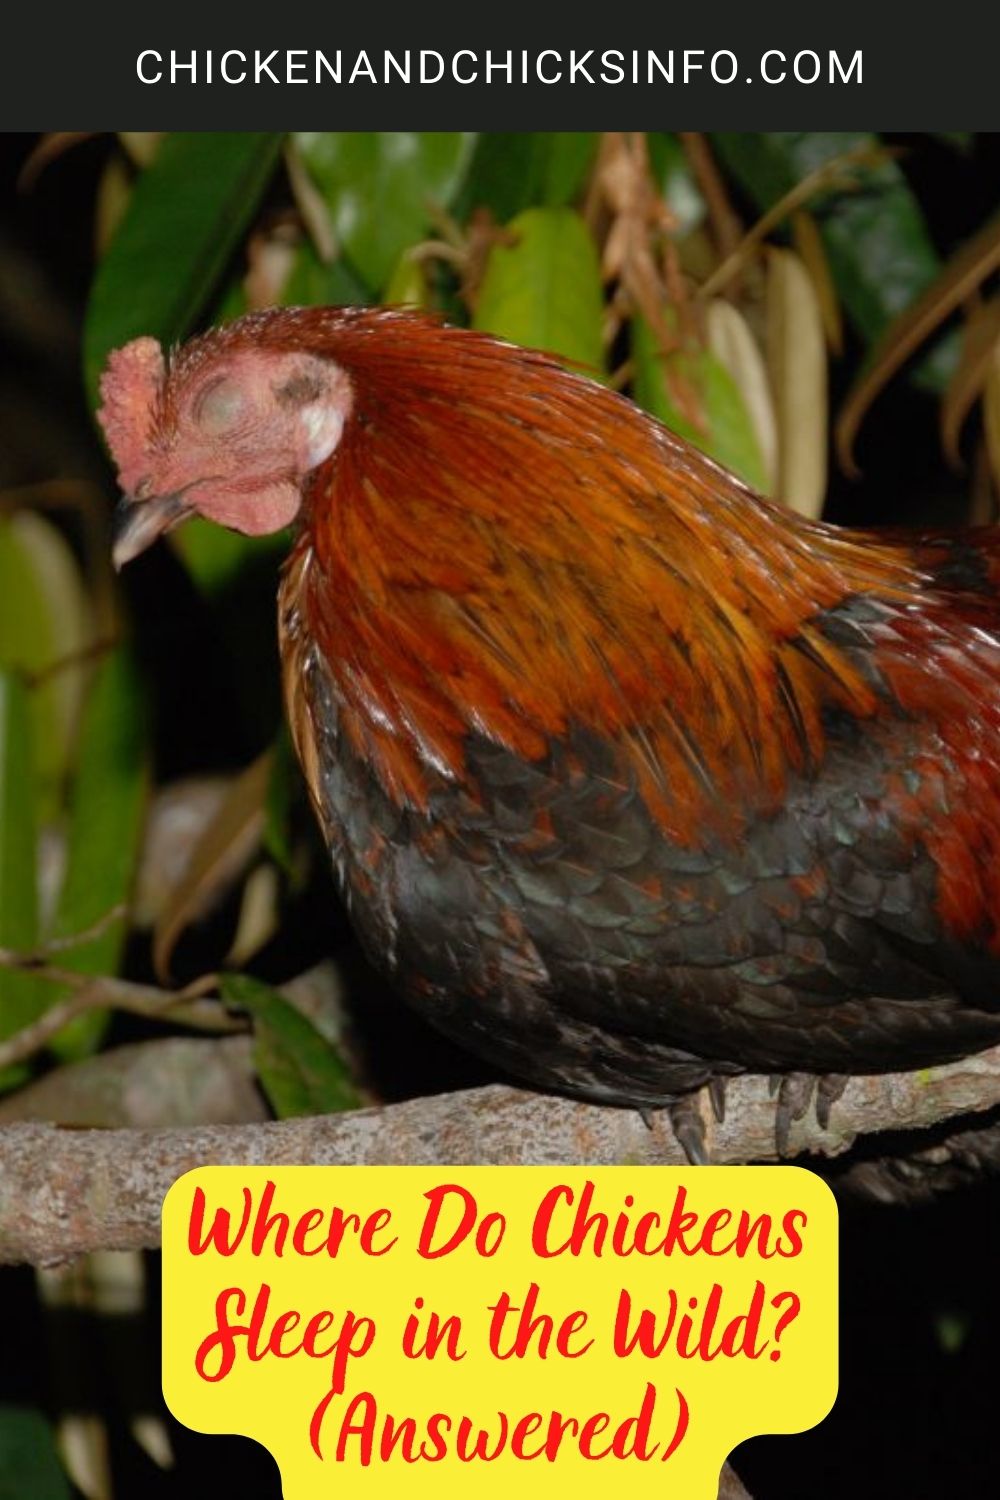 Where Do Chickens Sleep in the Wild? (Answered) poster.
